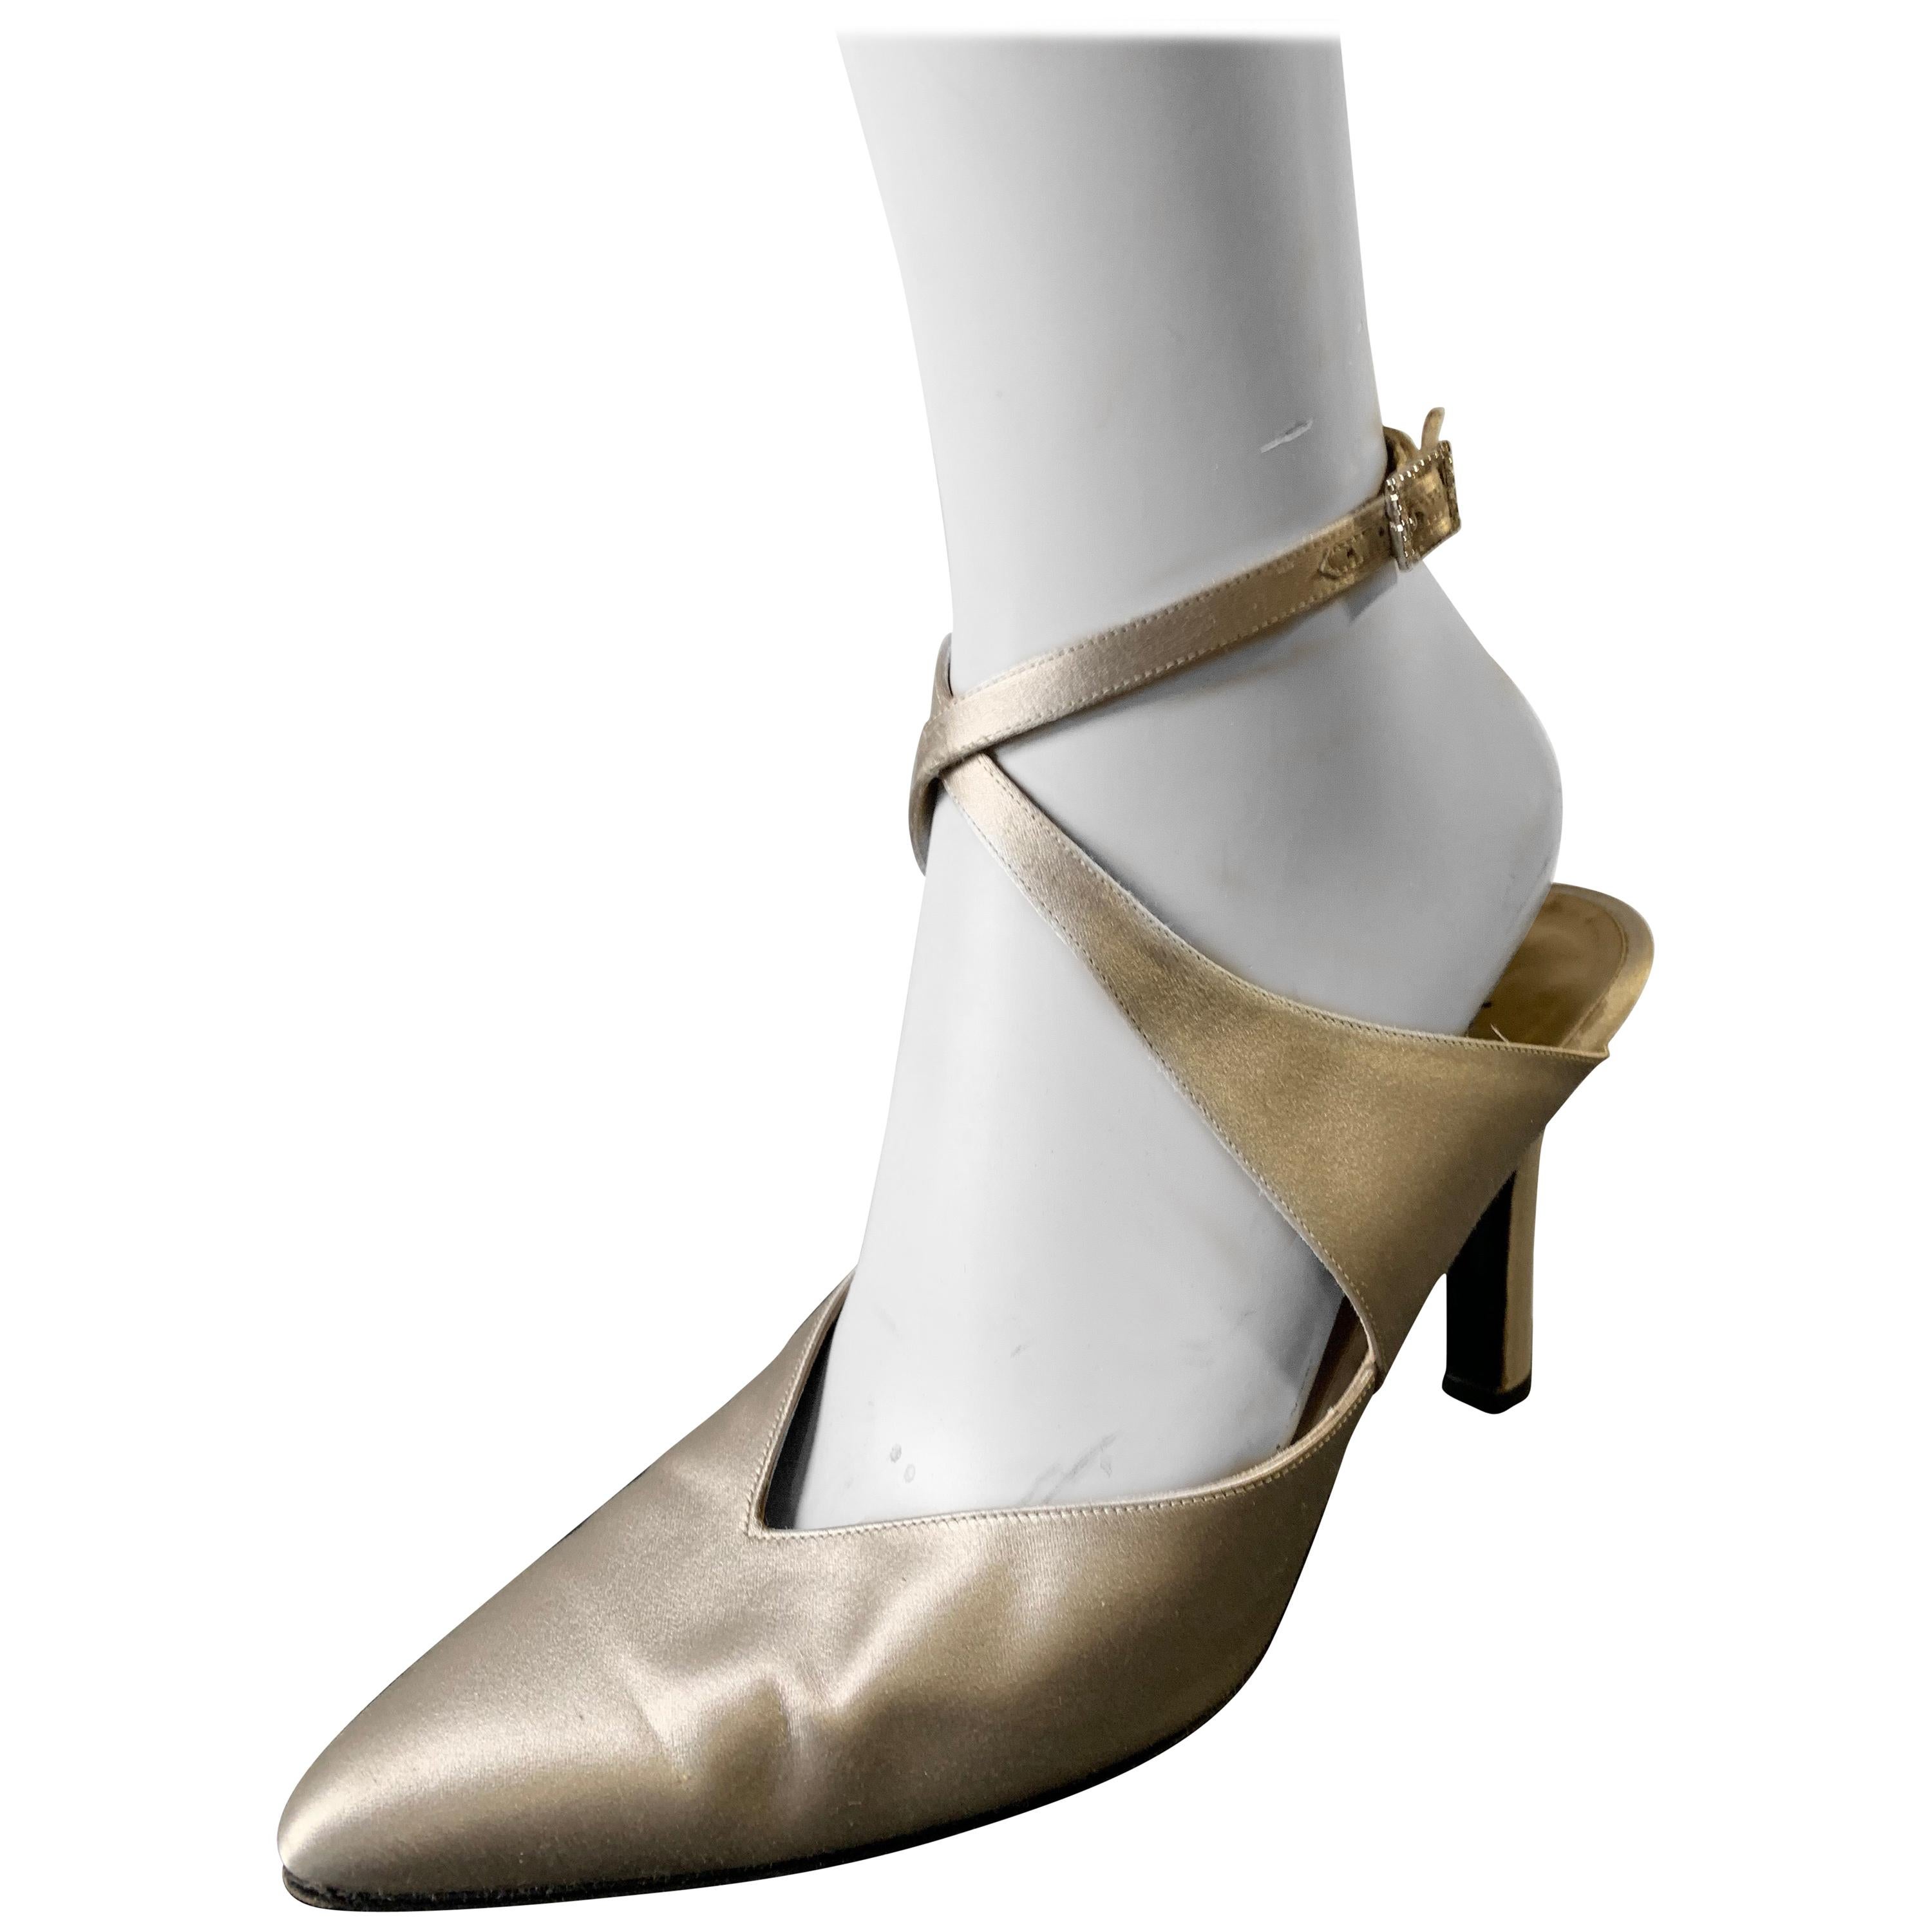 1980s Yves Saint Laurent Silver Satin Ankle-Cross Stillettos W/ Pointed Toe For Sale